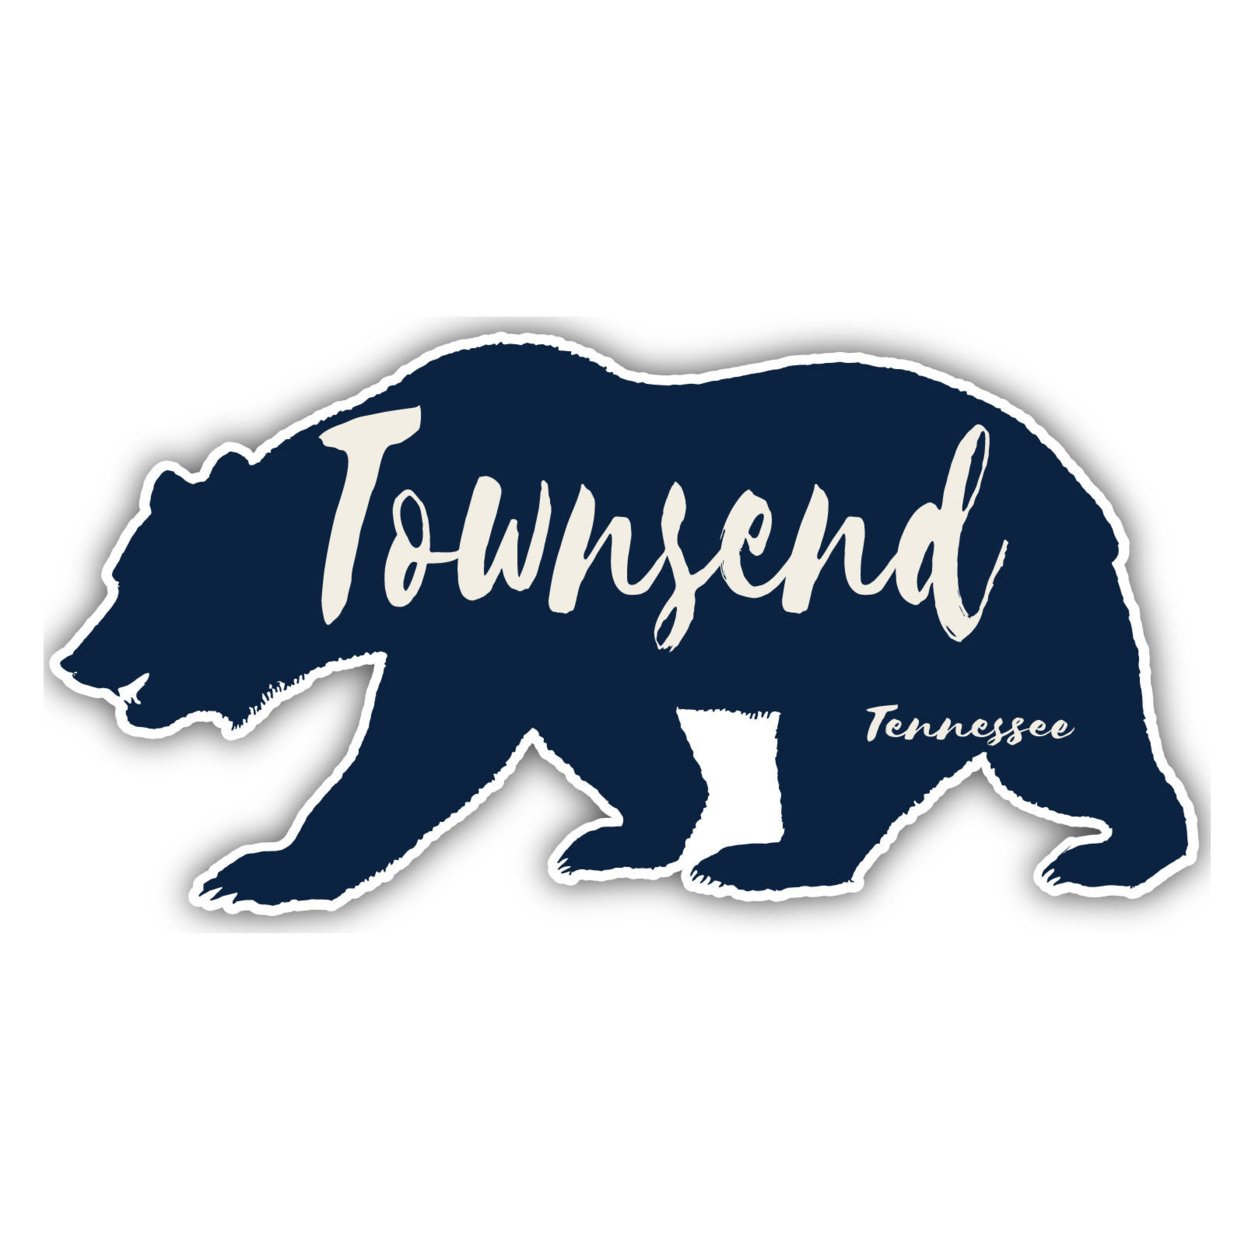 Townsend Tennessee Souvenir Decorative Stickers (Choose Theme And Size) - Single Unit, 4-Inch, Bear